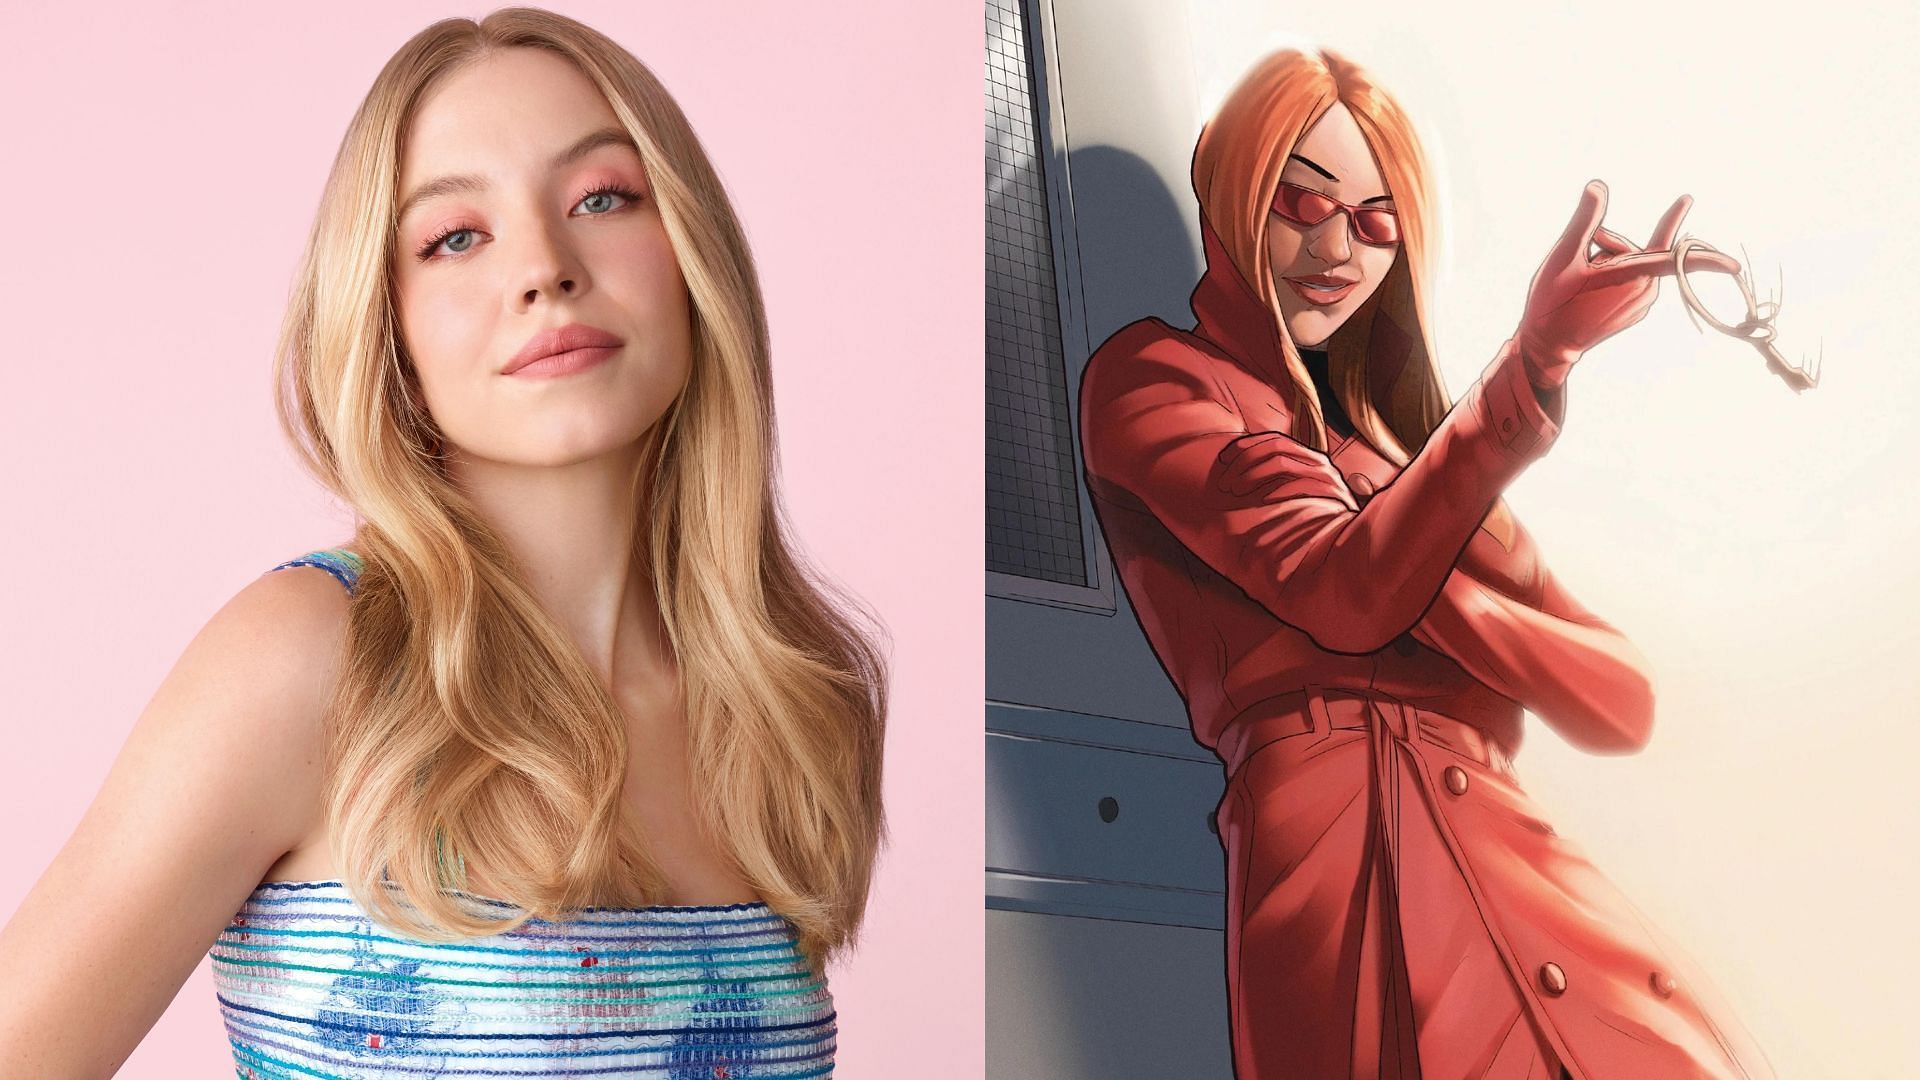 Sydney Sweeney confirmed to be playing Julia Carpenter in Madame Web (Image via Getty/Marvel)